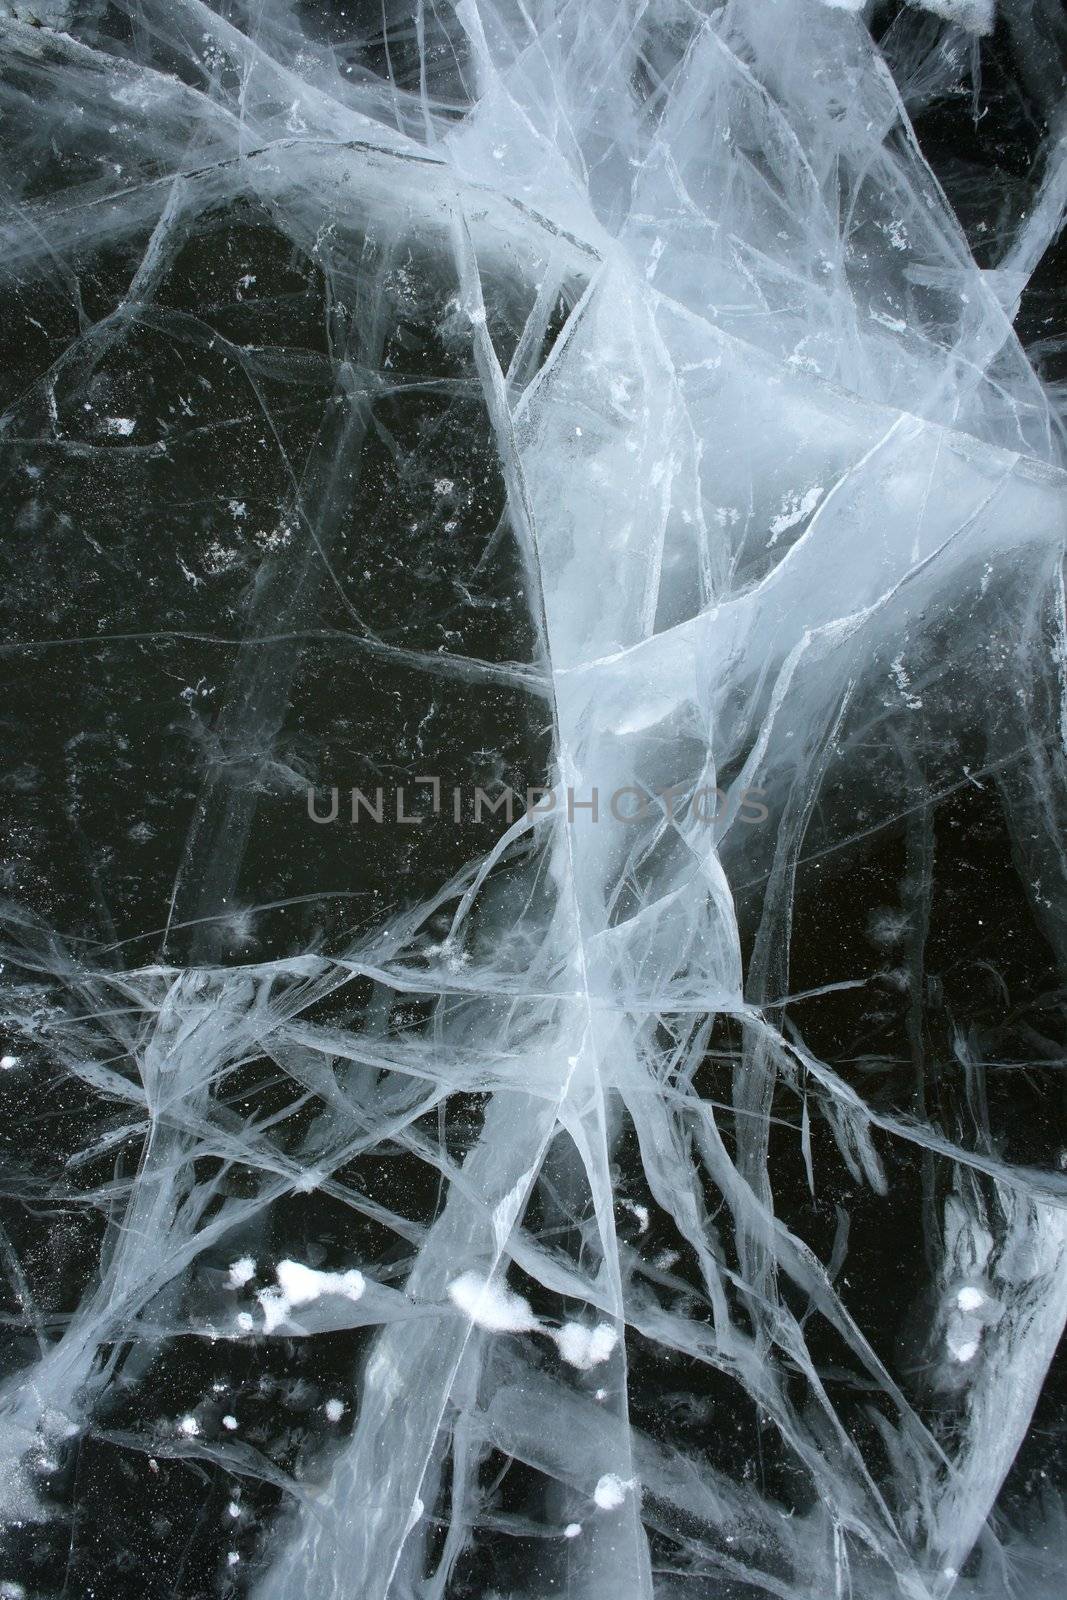 Black water of a frozen river and spooky cracked ice reminding abstract x-ray scan.